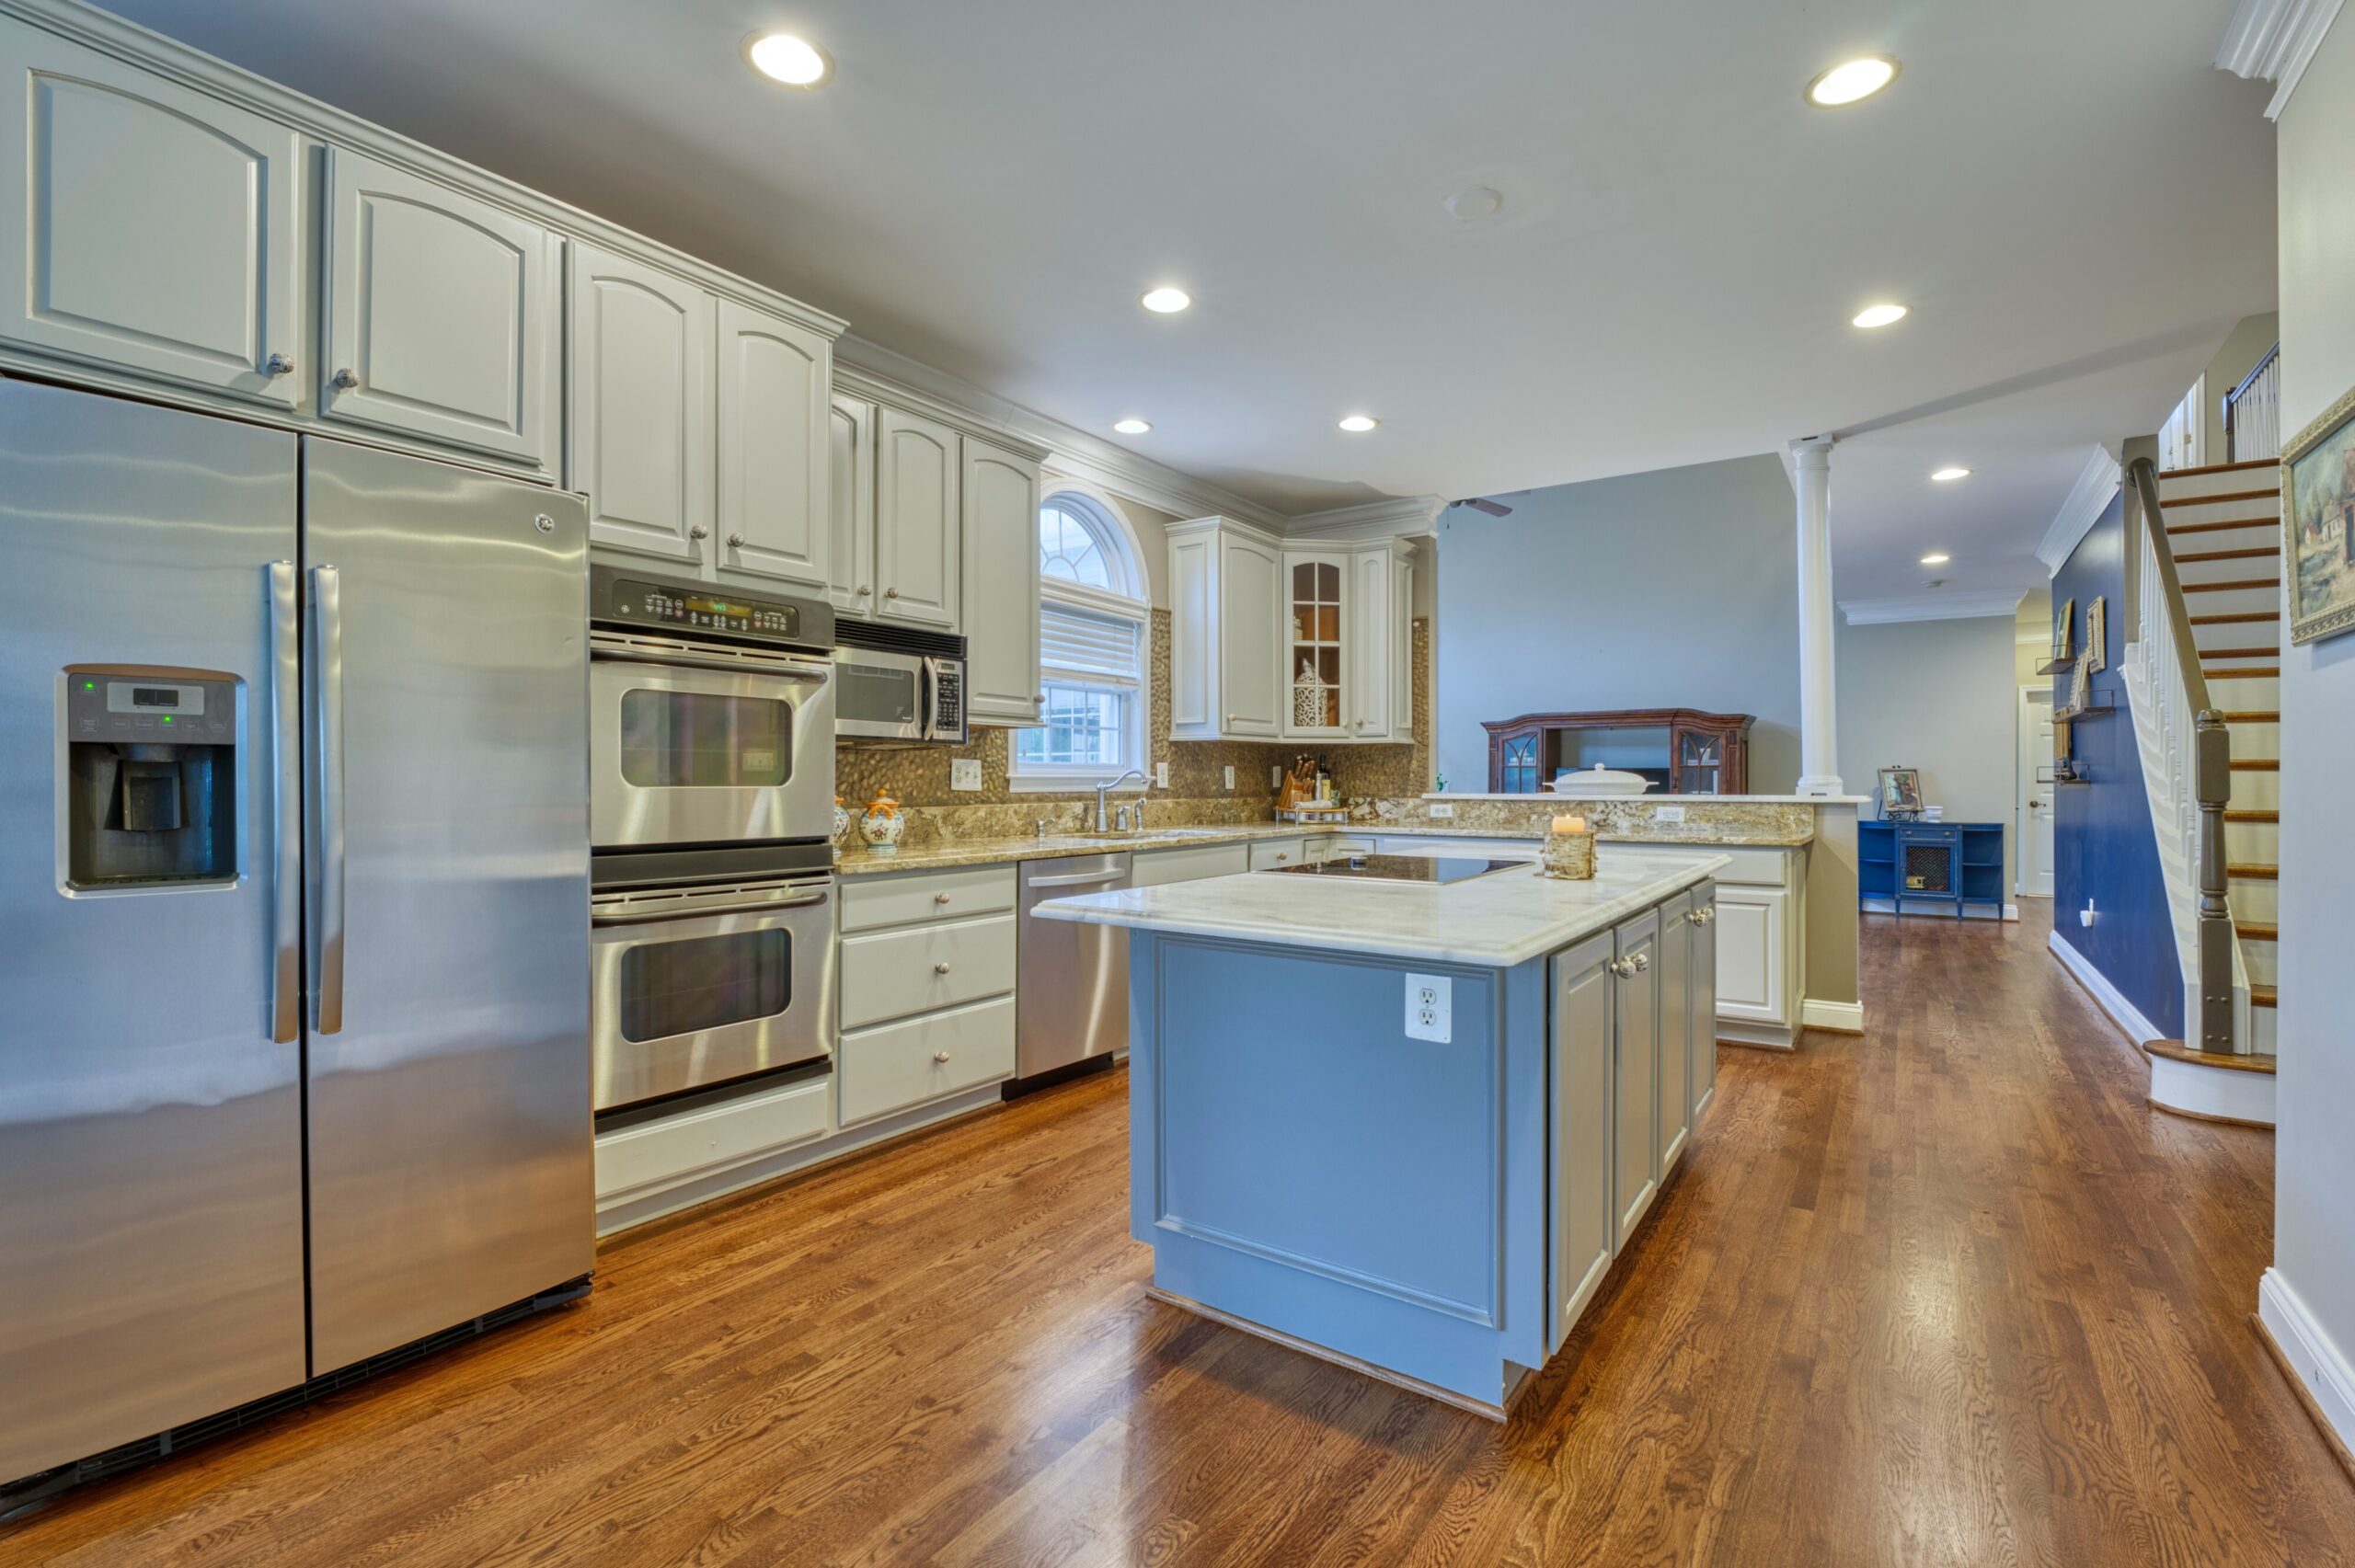 Professional interior photo of 16961 Heather Knolls Pl - showing the kitchen with granite and quartz counters, white cabinets, center island and large double door stainless steel fridge